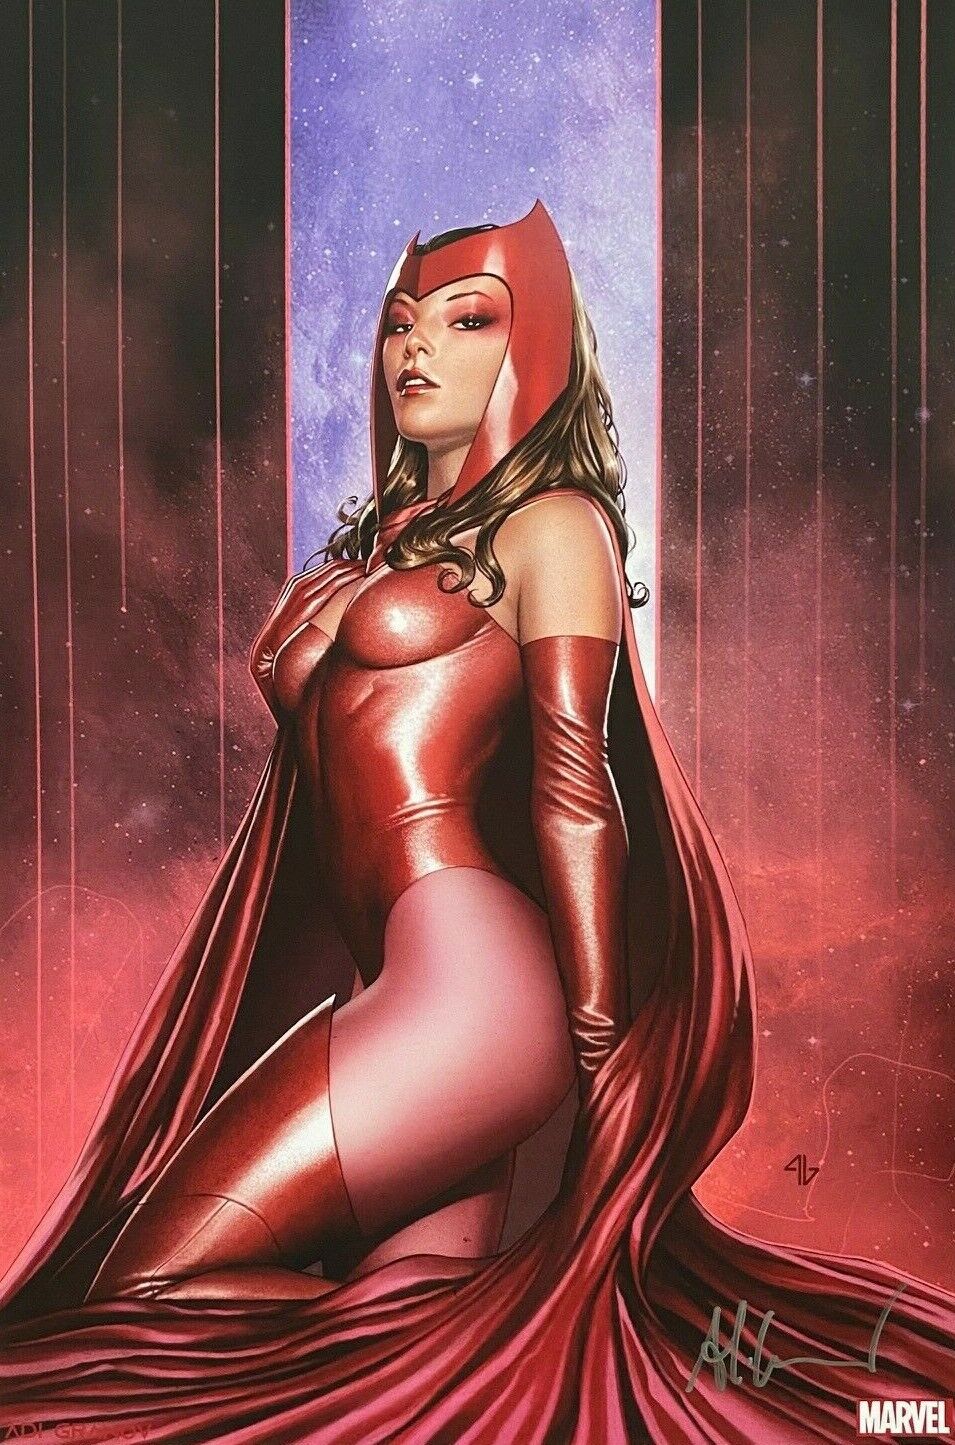 ADI GRANOV rare SCARLET WITCH art print A3 SIGNED limited LAST TWO Disney+